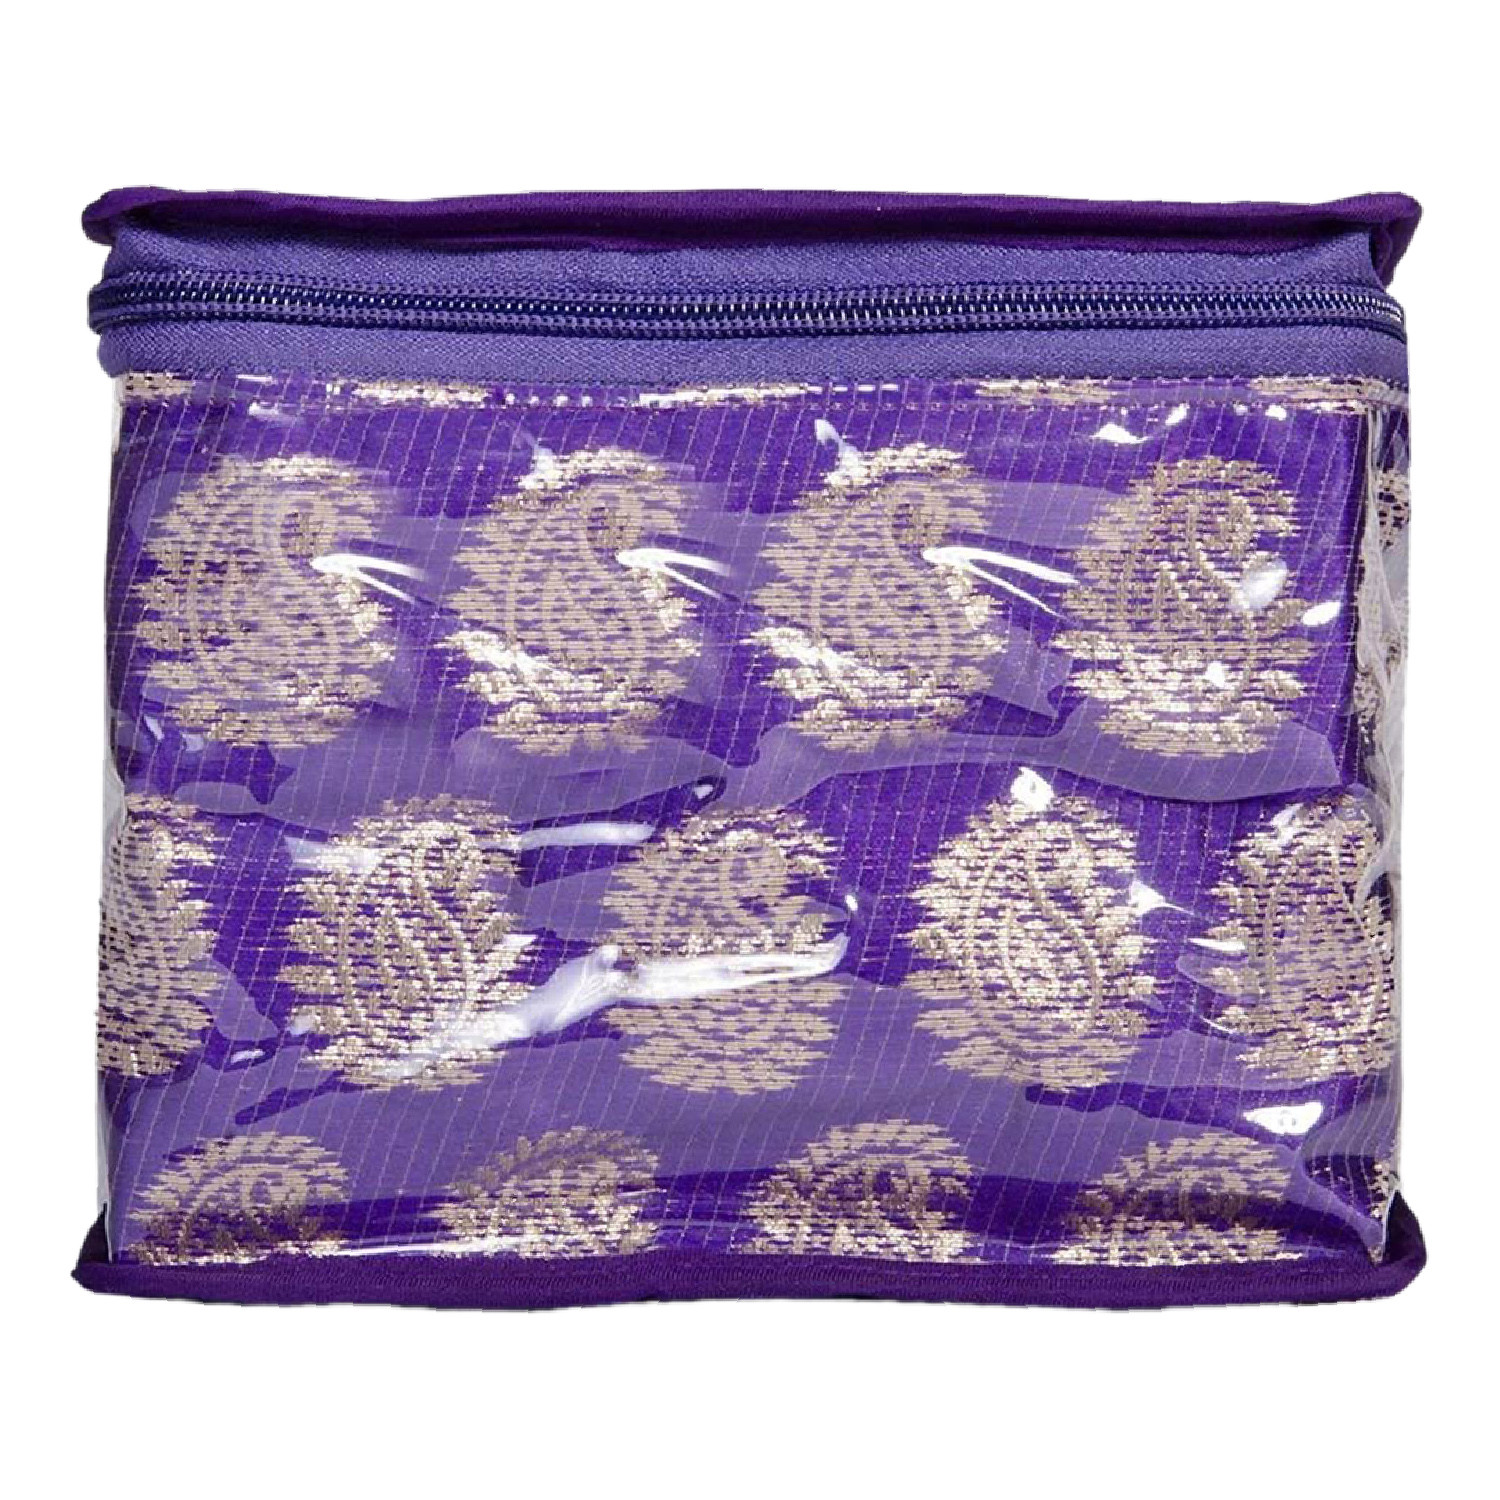 Kuber Industries PVC Laminated Jewellery Organizer|Carry Print Travel Cosmetic Bag |Accessories Organizer for Small Jewellery & 8 Transparent Pouches (Purple)